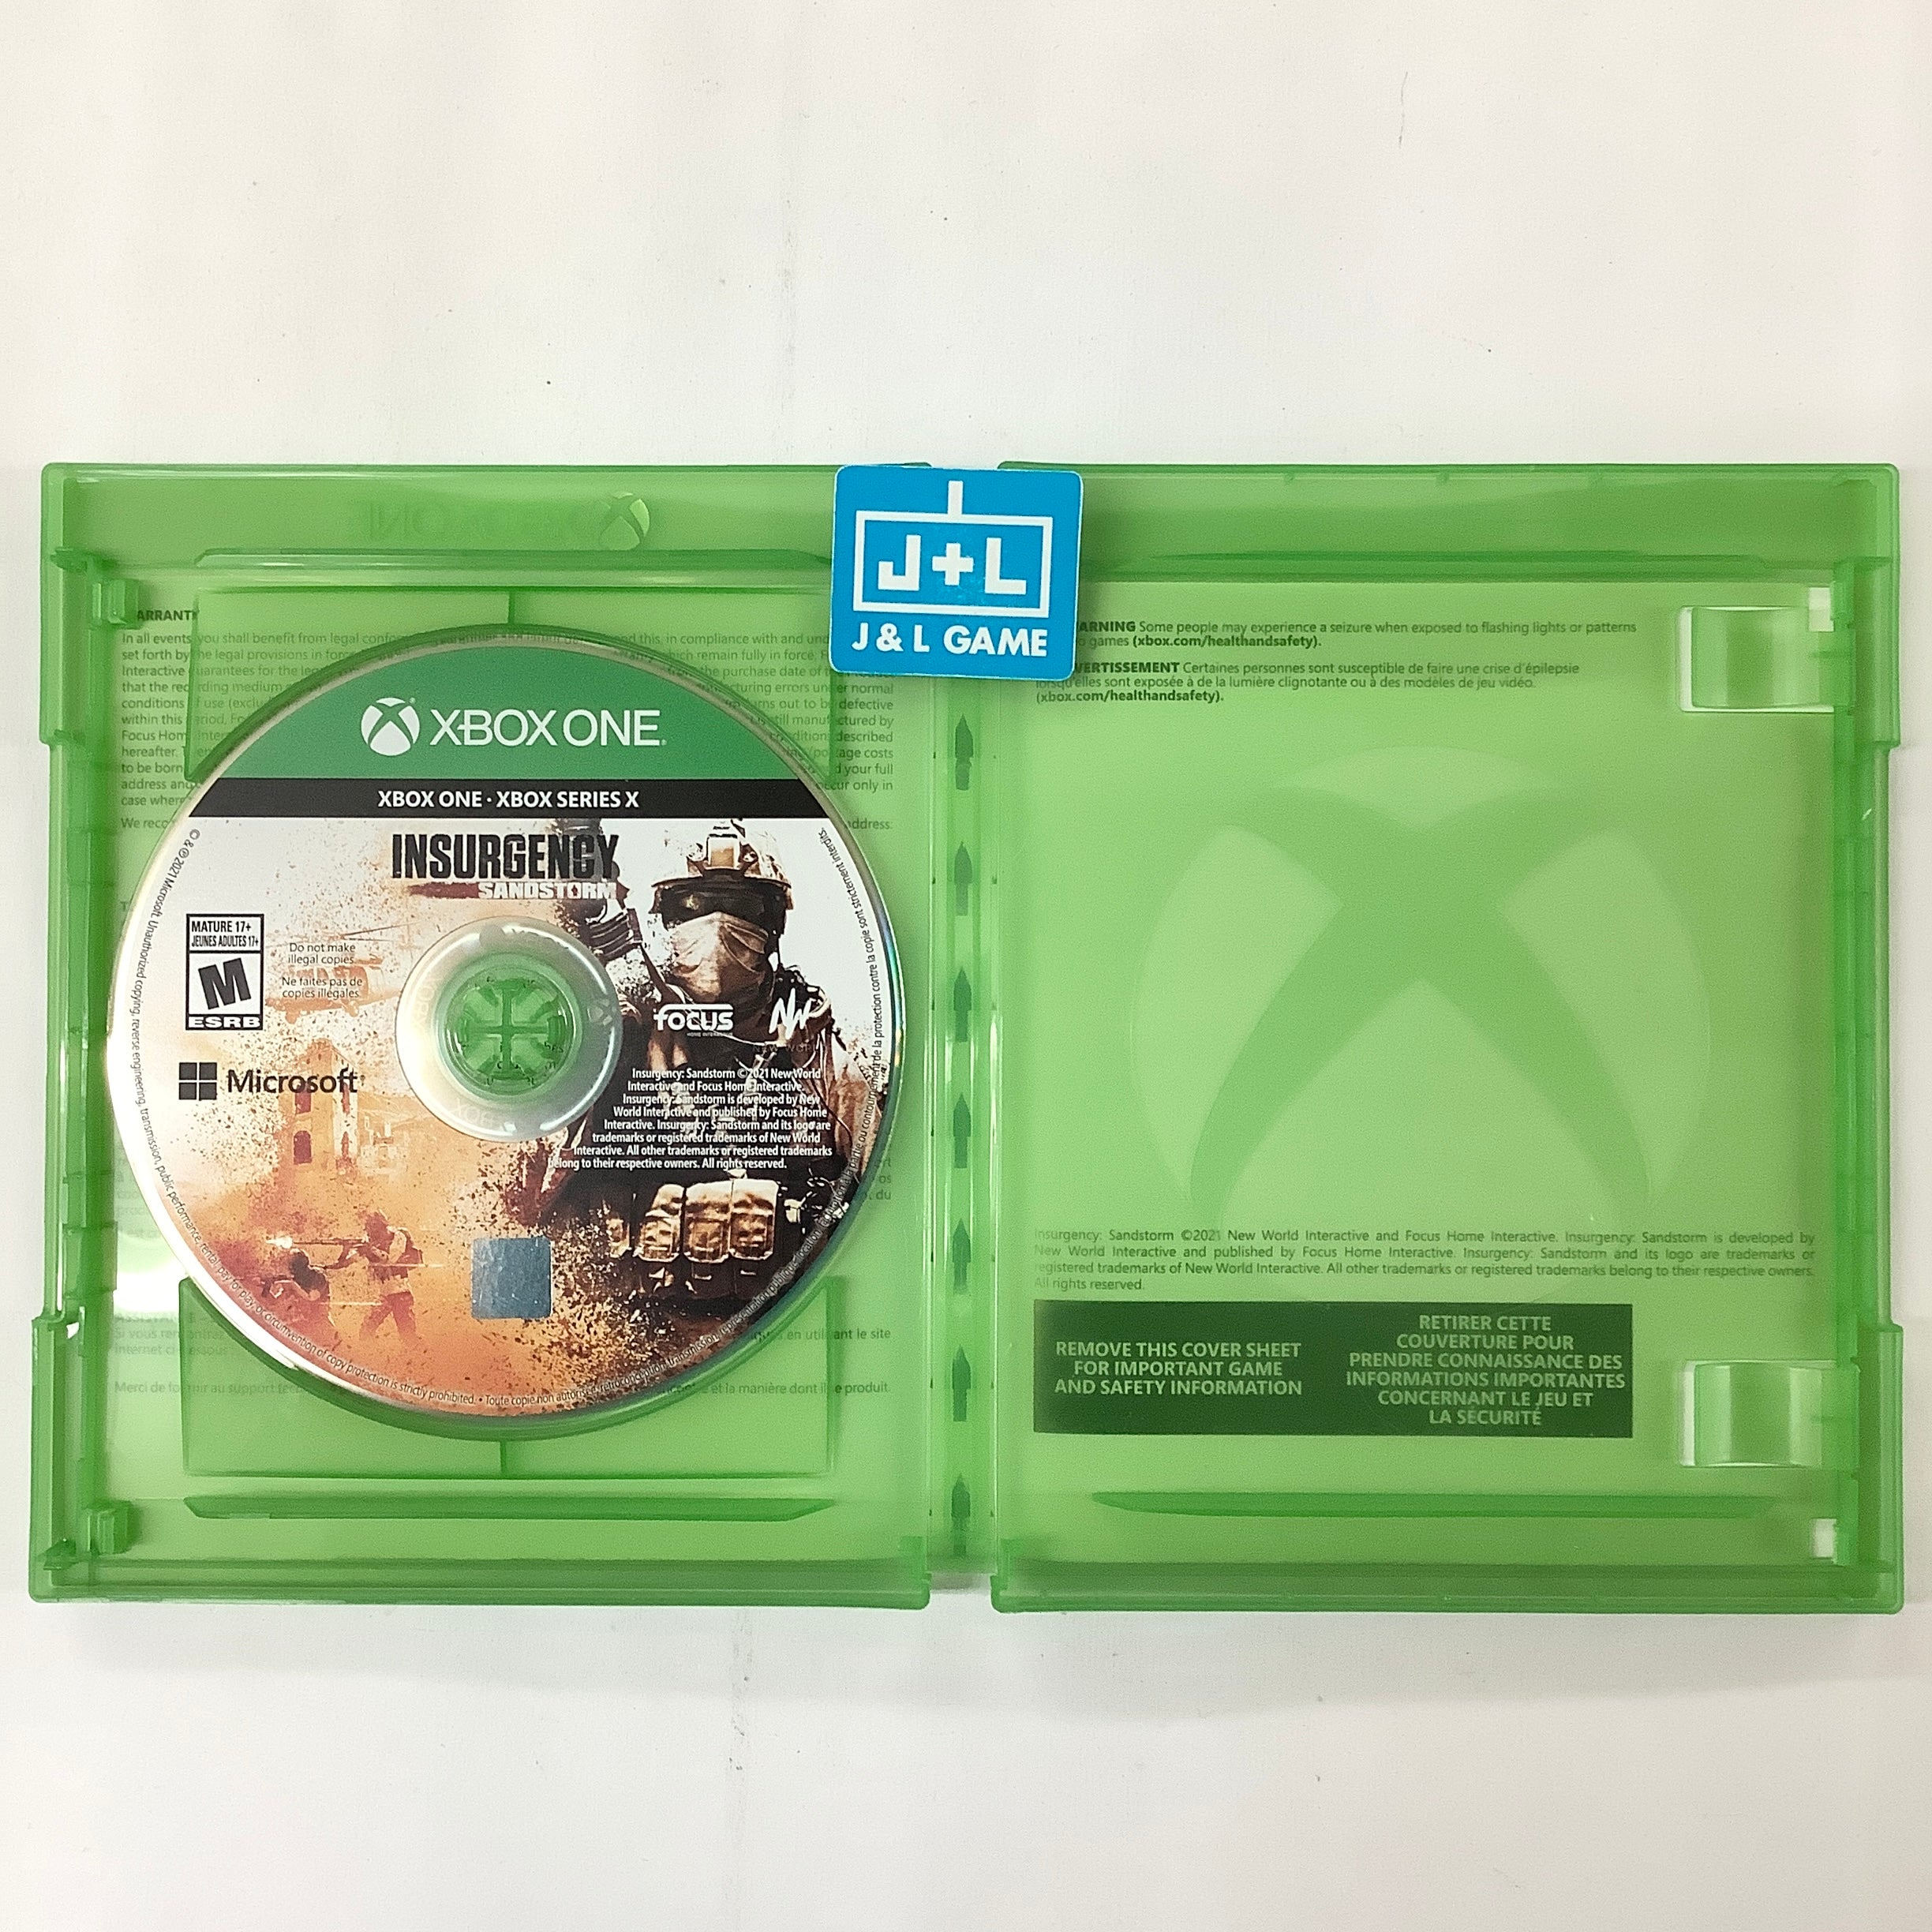 Insurgency Sandstorm - (XB1) Xbox One [Pre-Owned] Video Games Solutions 2 Go Inc.   